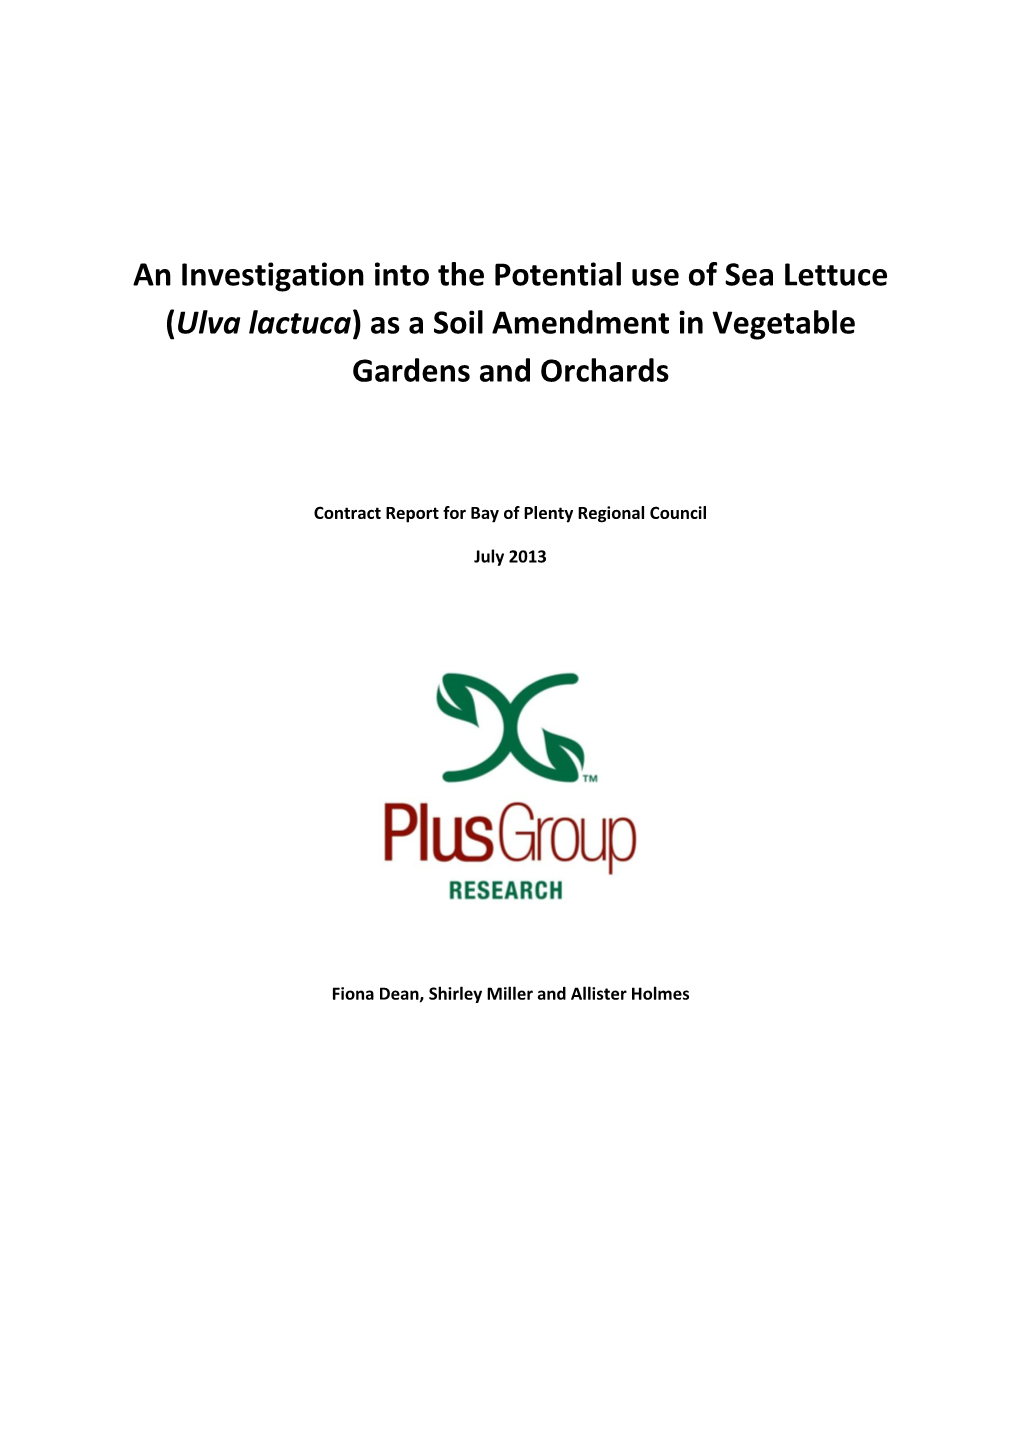 An Investigation Into the Potential Use of Sea Lettuce (Ulva Lactuca) As a Soil Amendment in Vegetable Gardens and Orchards